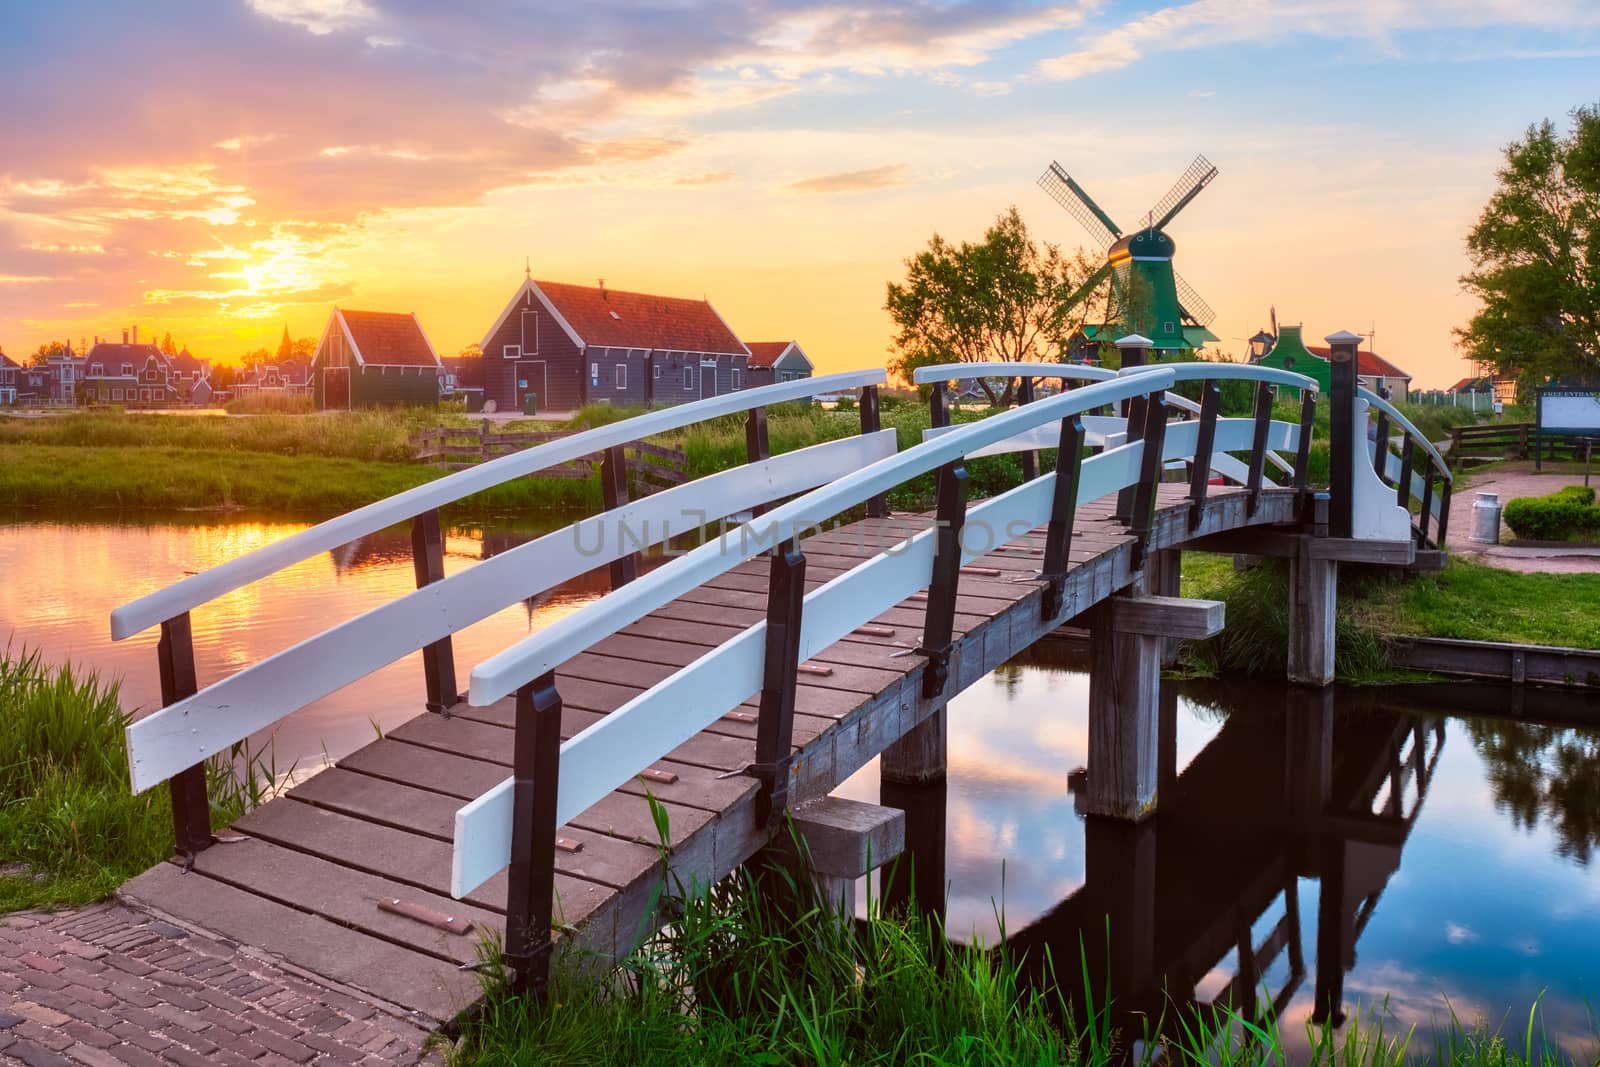 Netherlands rural scene - bridge over canal and windmills at famous tourist site Zaanse Schans in Holland on sunset with dramatic sky. Zaandam, Netherlands